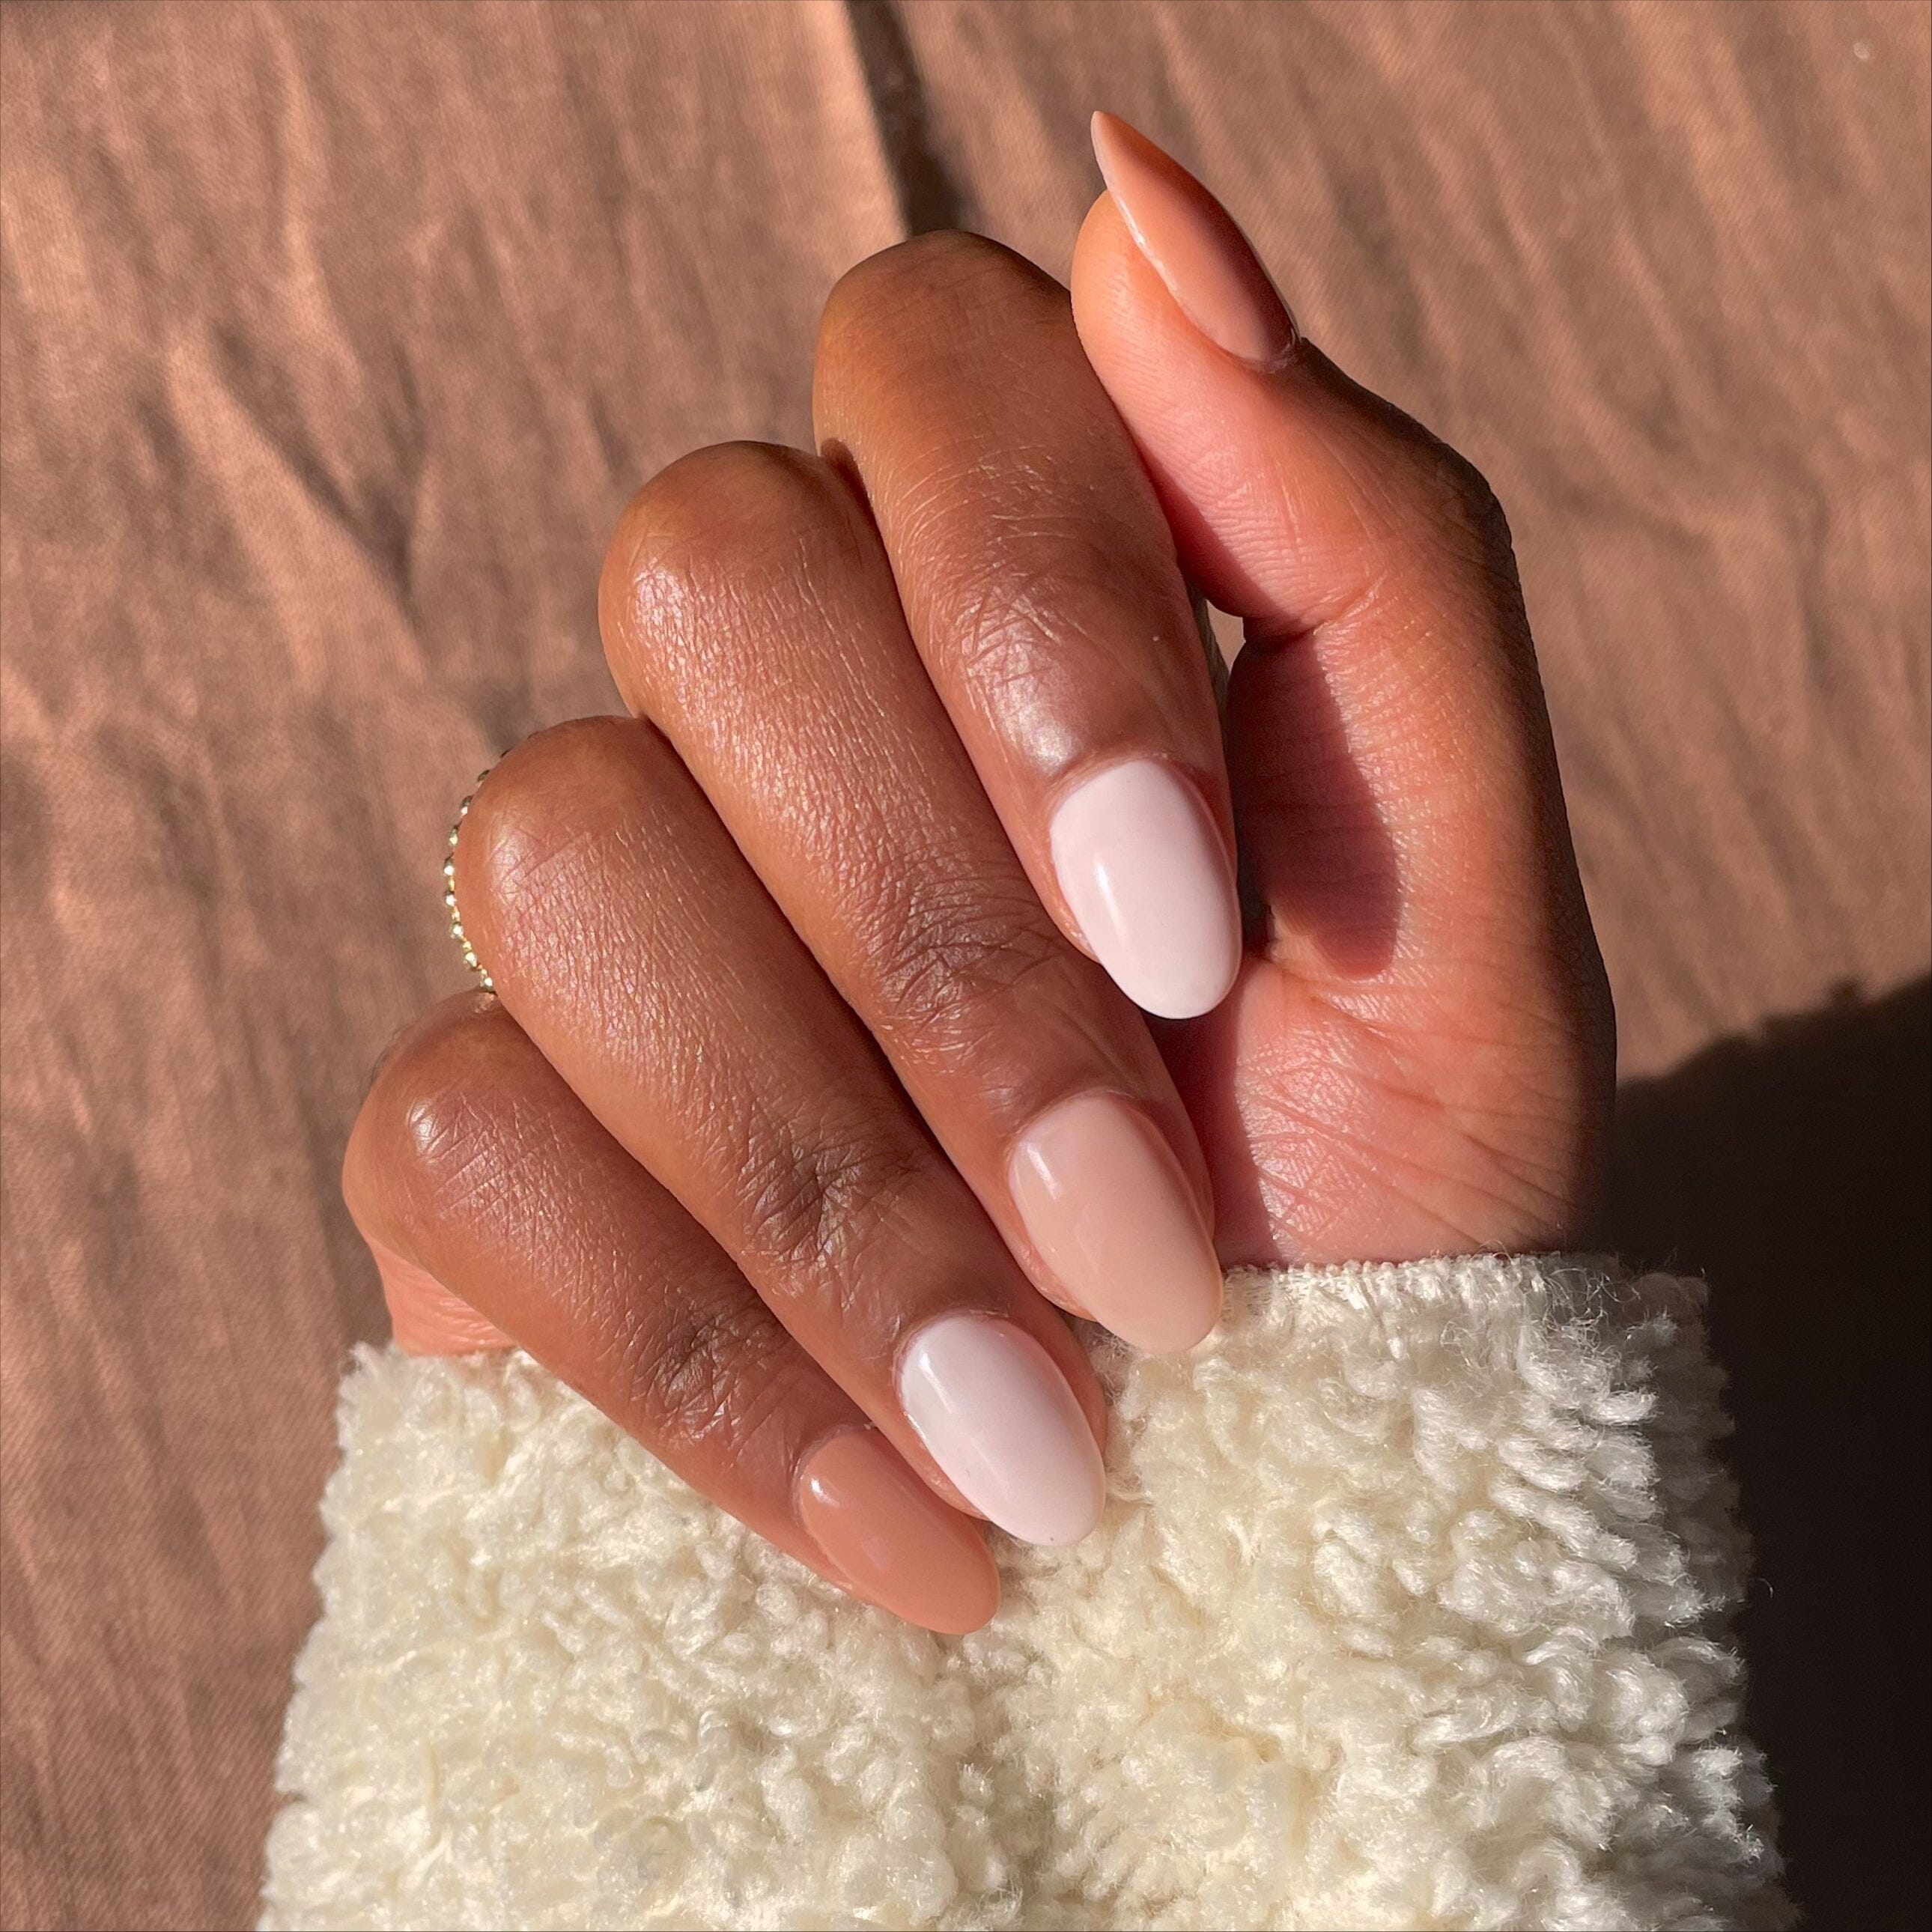 The most impressive designs of elegant almond nails to do at home